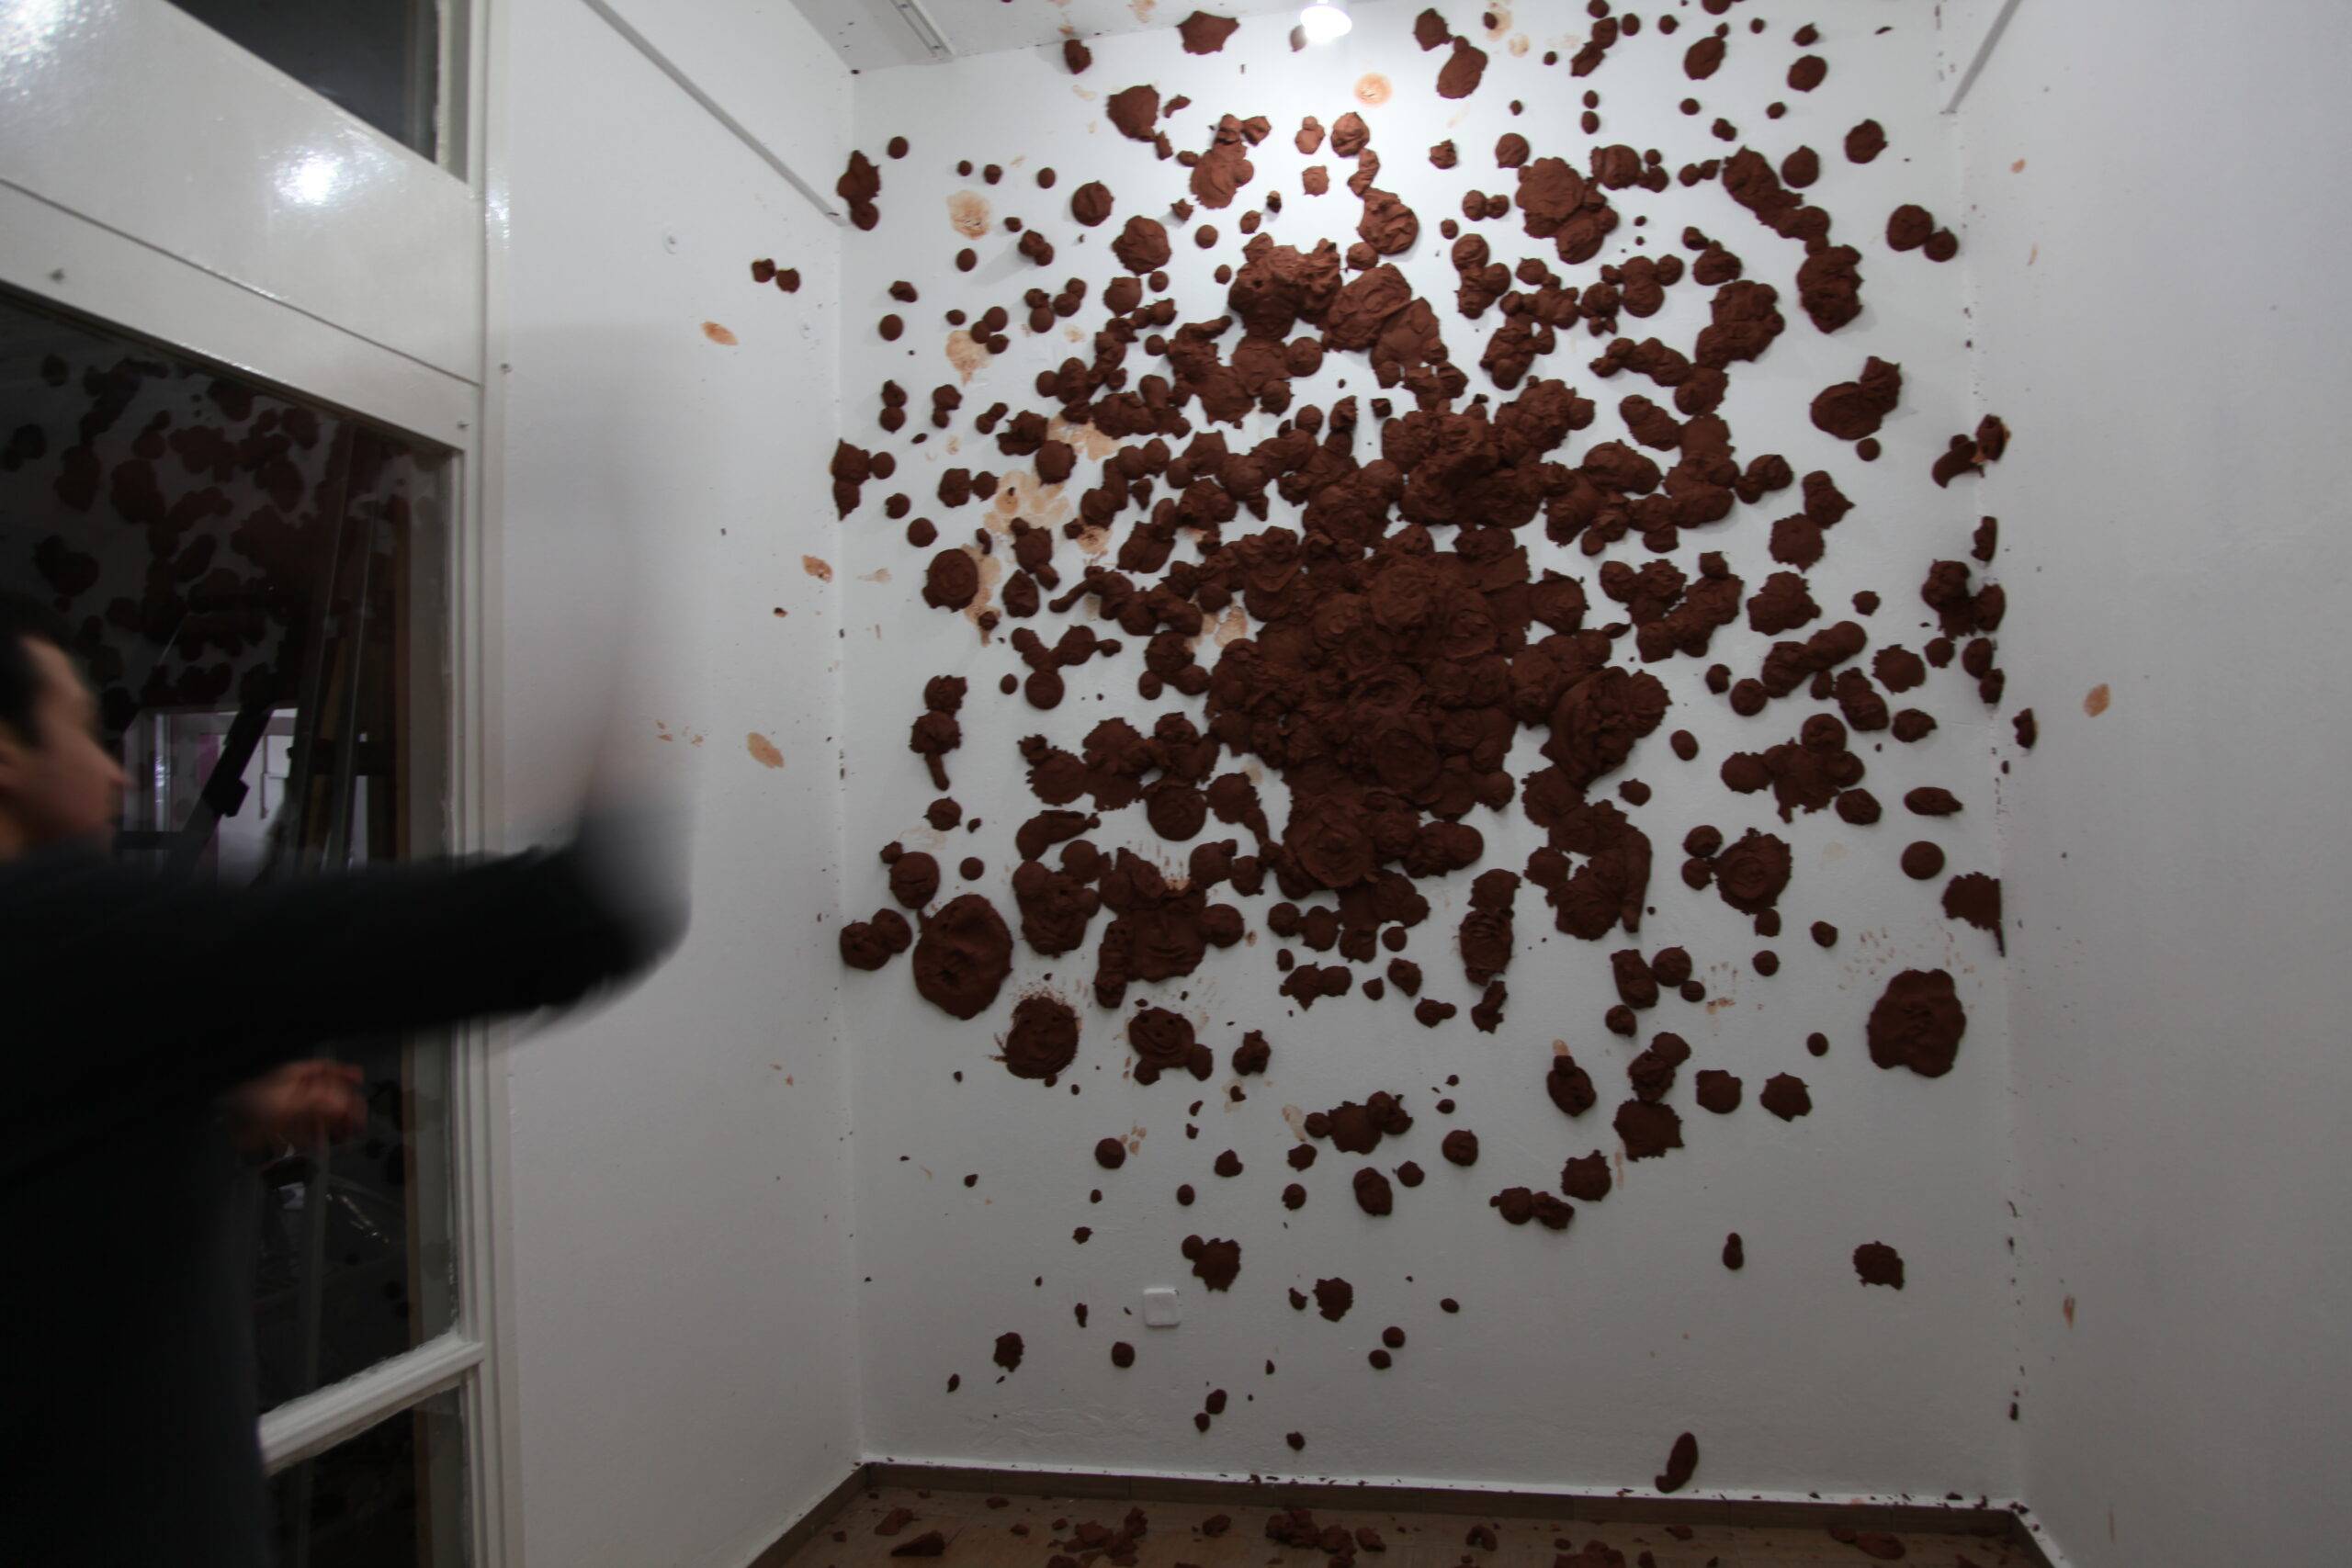 A person throws clay at the wall.